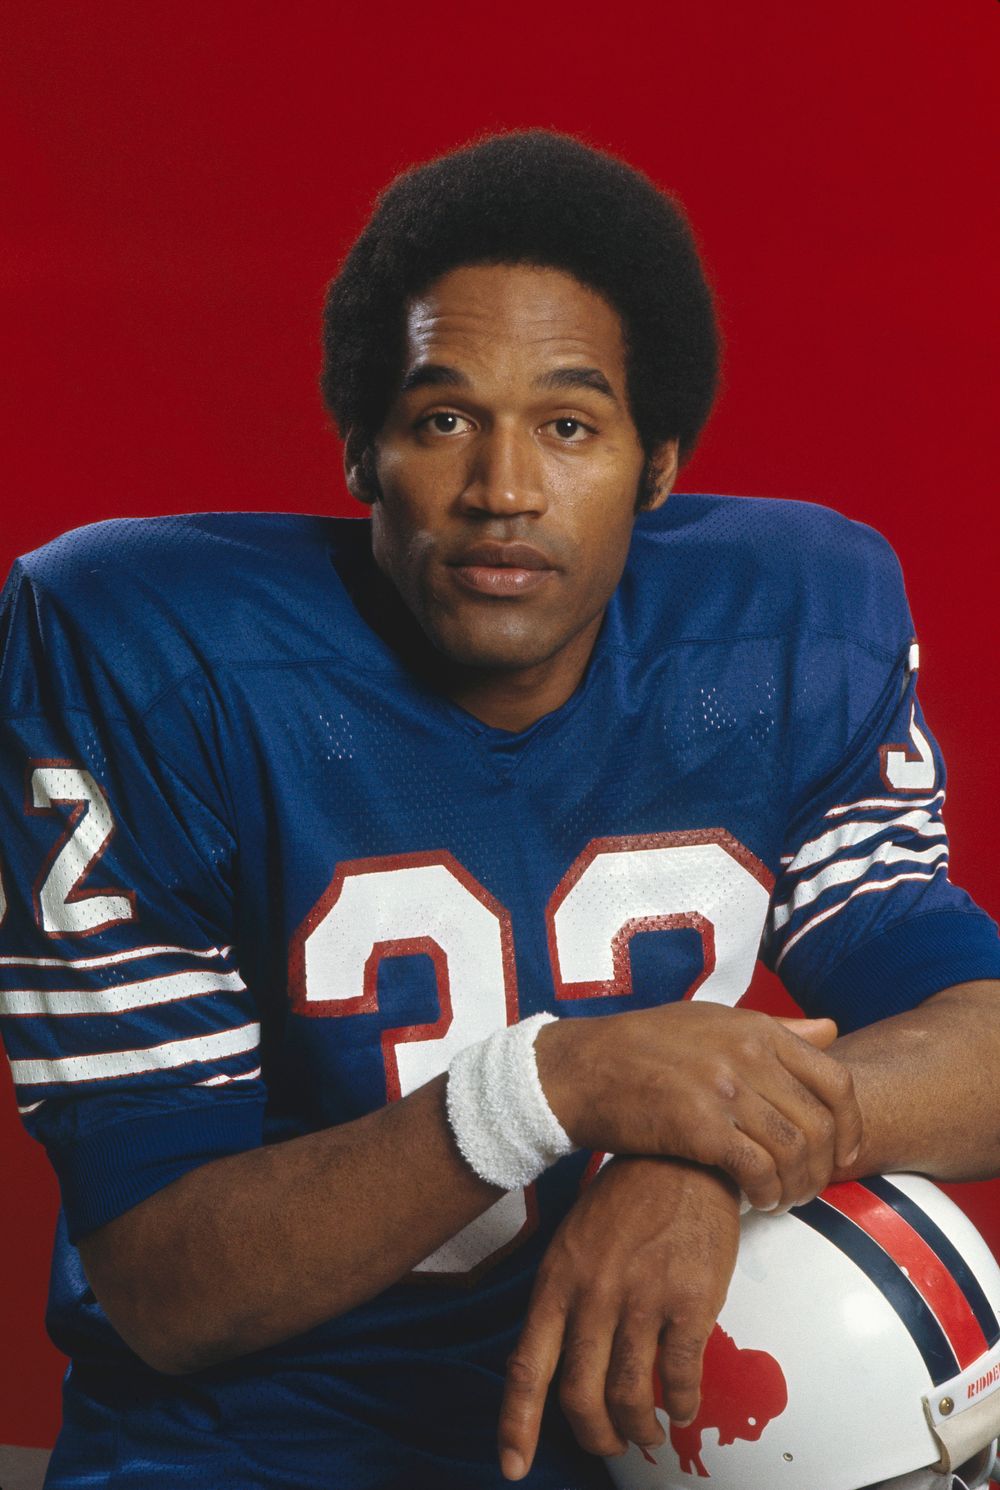 UNDATED: Buffalo Bills’ running back O.J. Simpson #32 poses for a portrait circa early 1970’s. (Photo by Focus on Sport via Getty Images) FOCUS ON SPORT/GETTY IMAGES